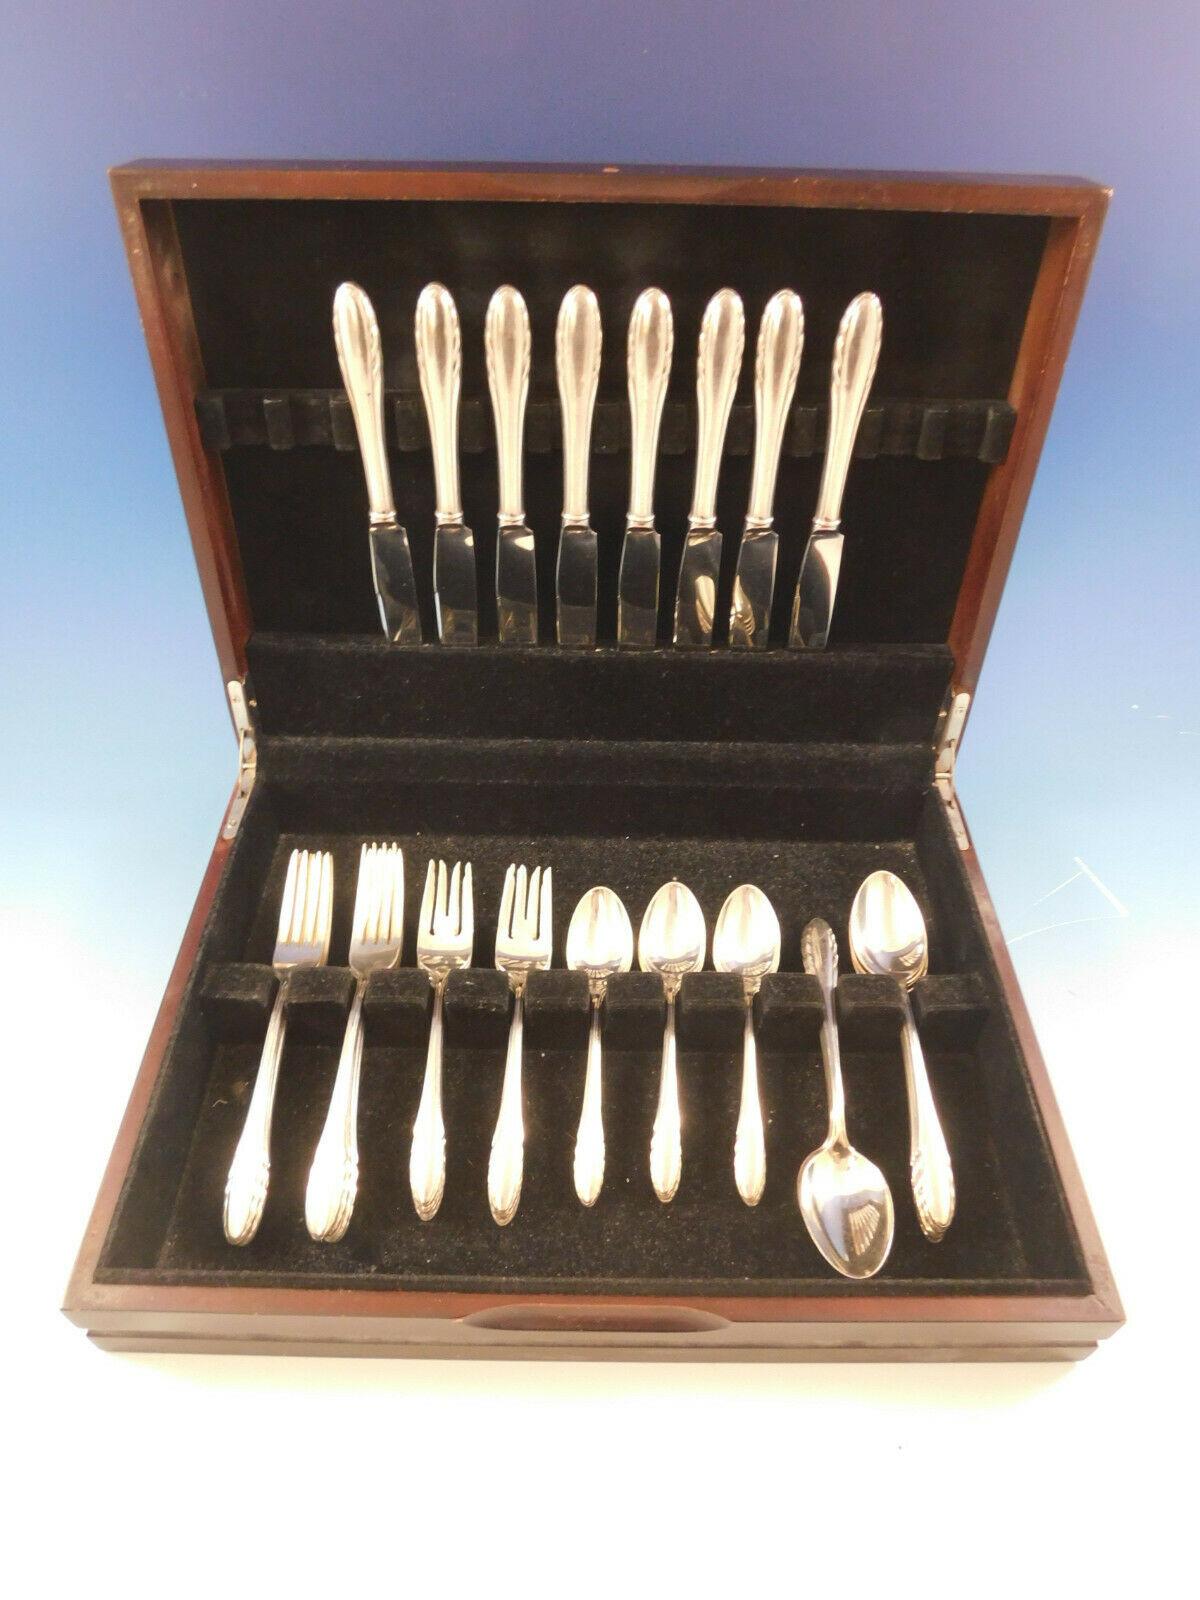 Lyric by Gorham sterling silver flatware set, 40 pieces. This set includes:

8 knives, 8 7/8